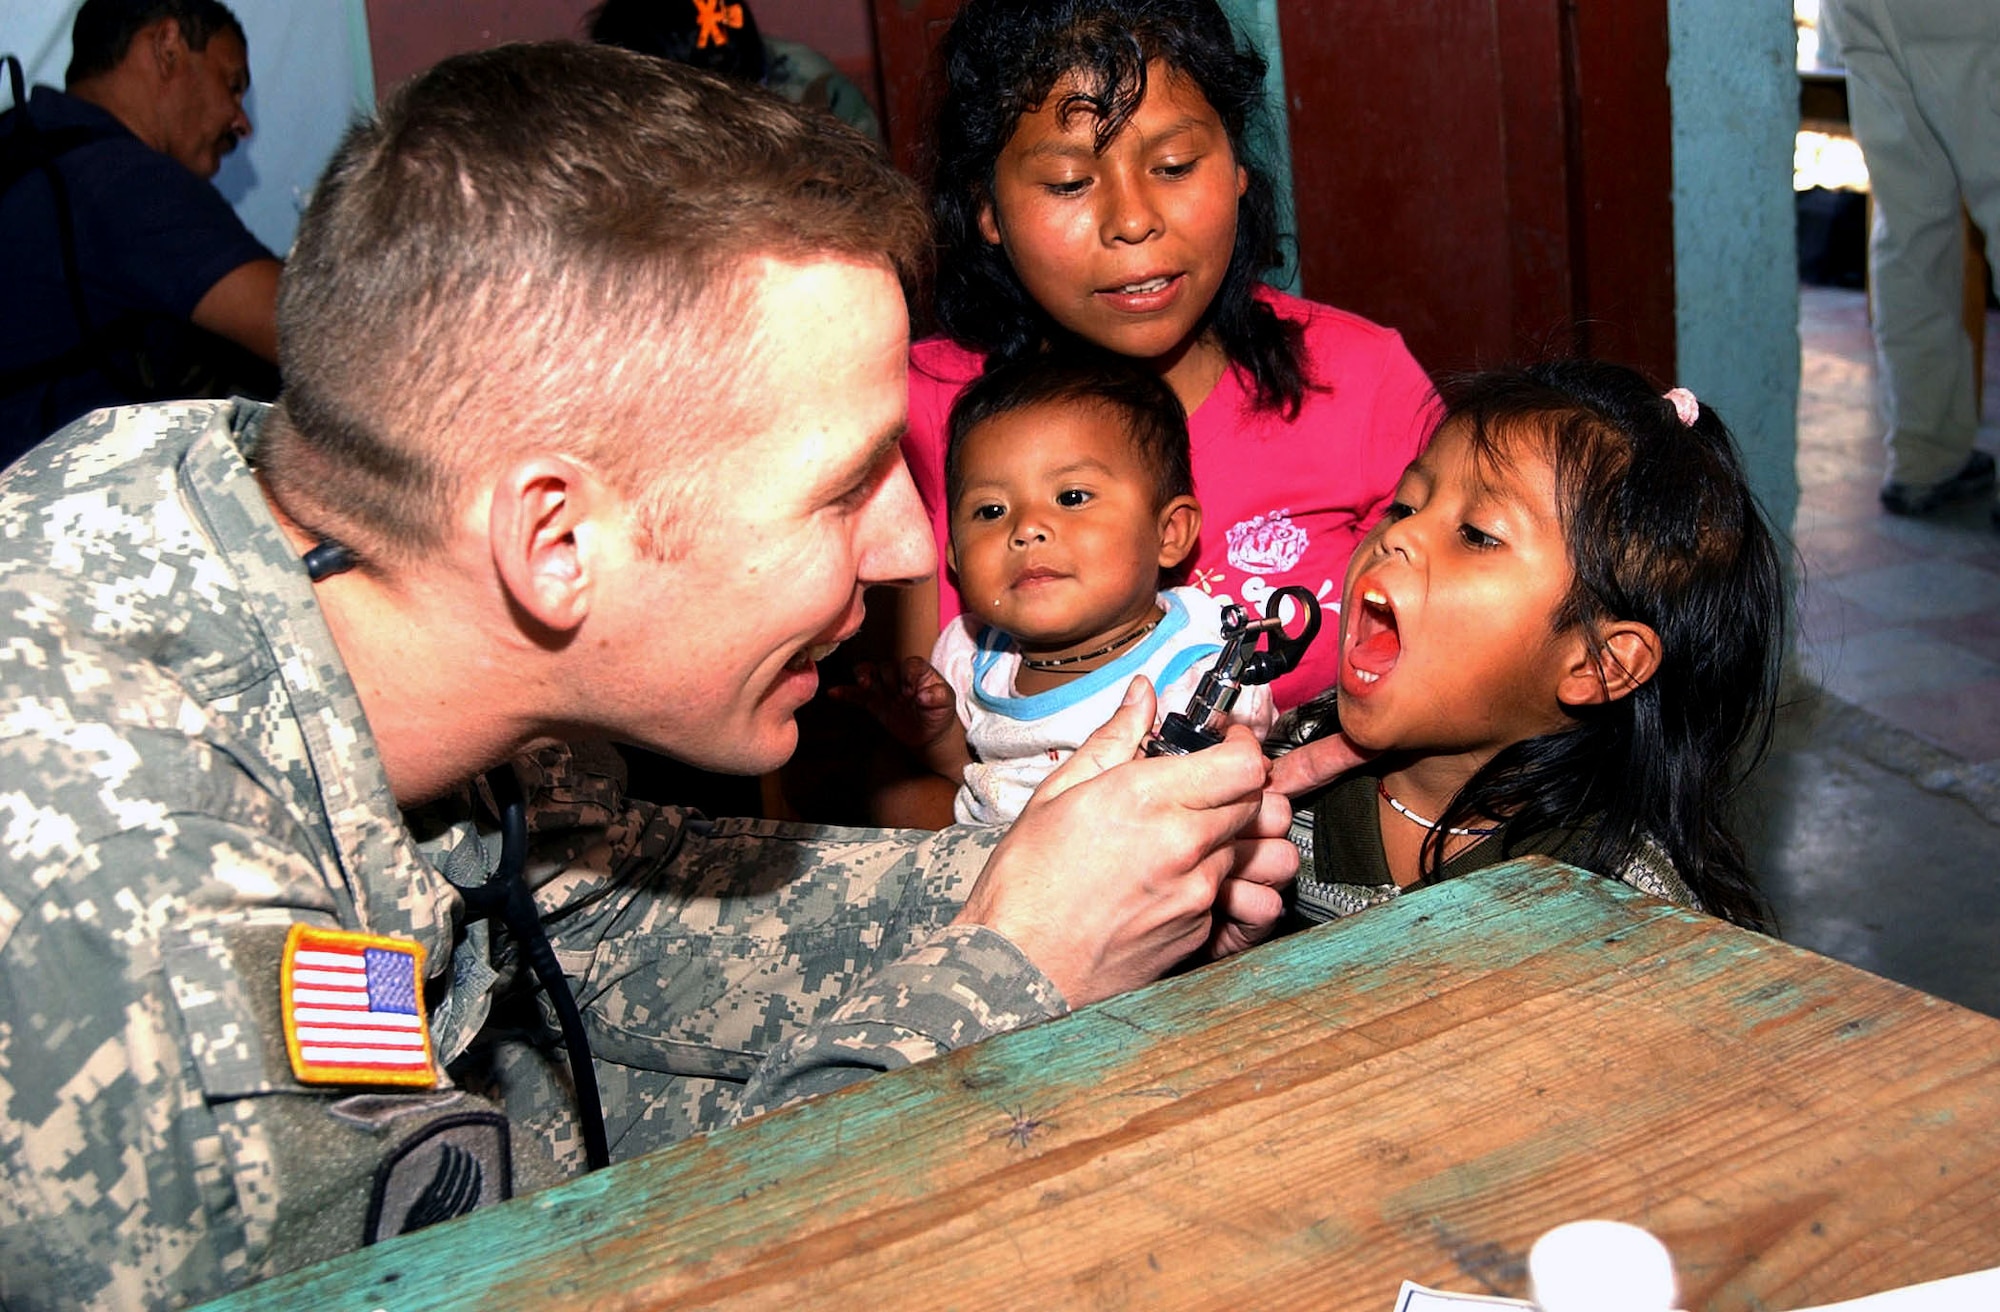 Army Maj. (Dr.) Richard Malish examines a child during a Medical Readiness Training Exercise June 29 in El Horno, Honduras. The medical team saw 1,072 patients during the two-day mission. Major Malish is a cardiologist and the flight surgeon at Soto Cano Air Base, Honduras.(U.S. Air Force photo/Tech. Sgt. Sonny Cohrs) 
               